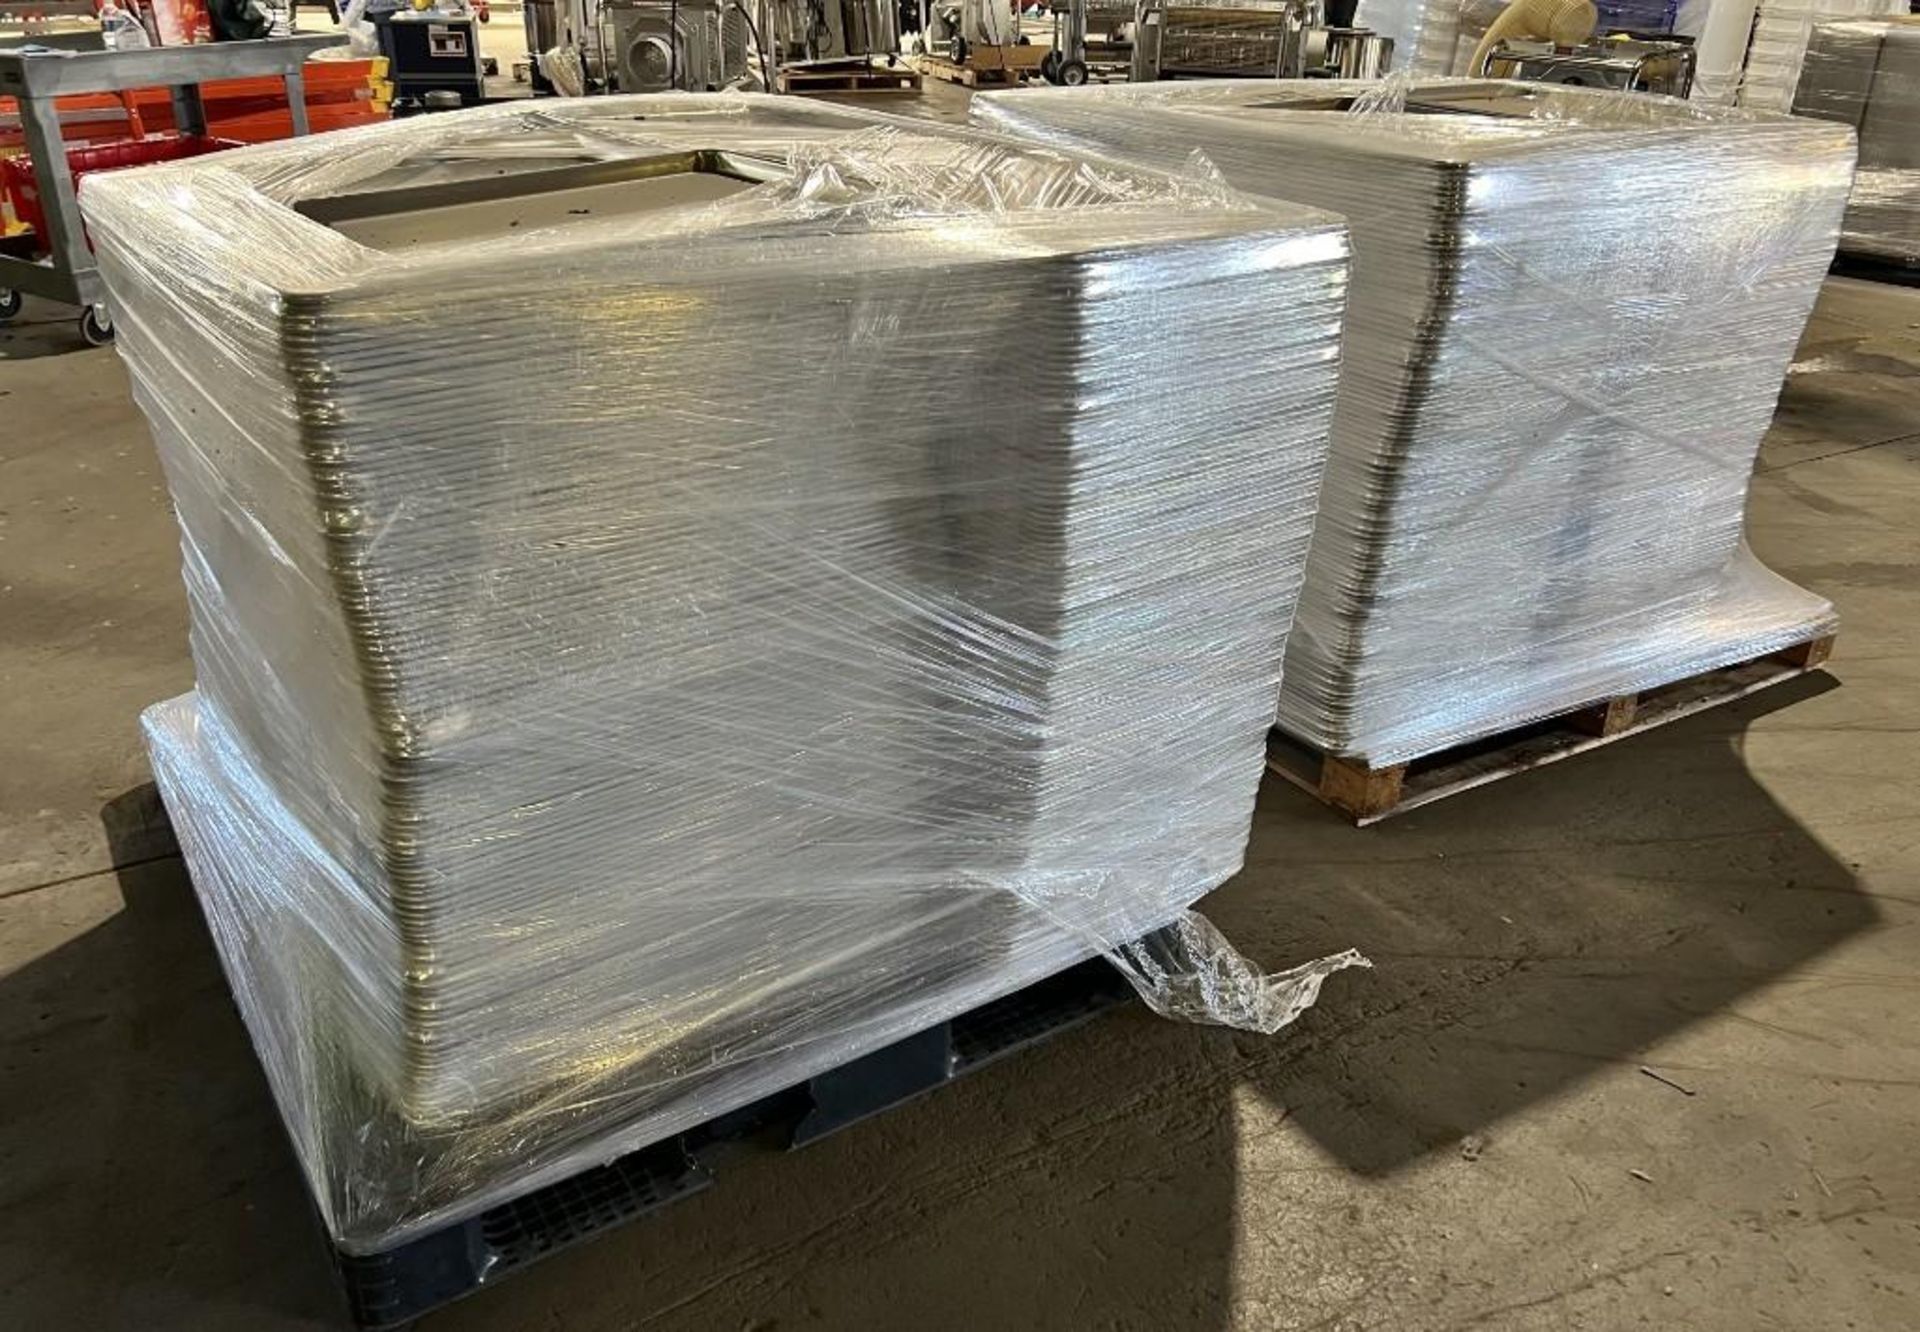 Lot Of Approximate 900 Stainless Steel Baking Pans. Approximate 17" x 25" x 1" deep. - Image 2 of 5